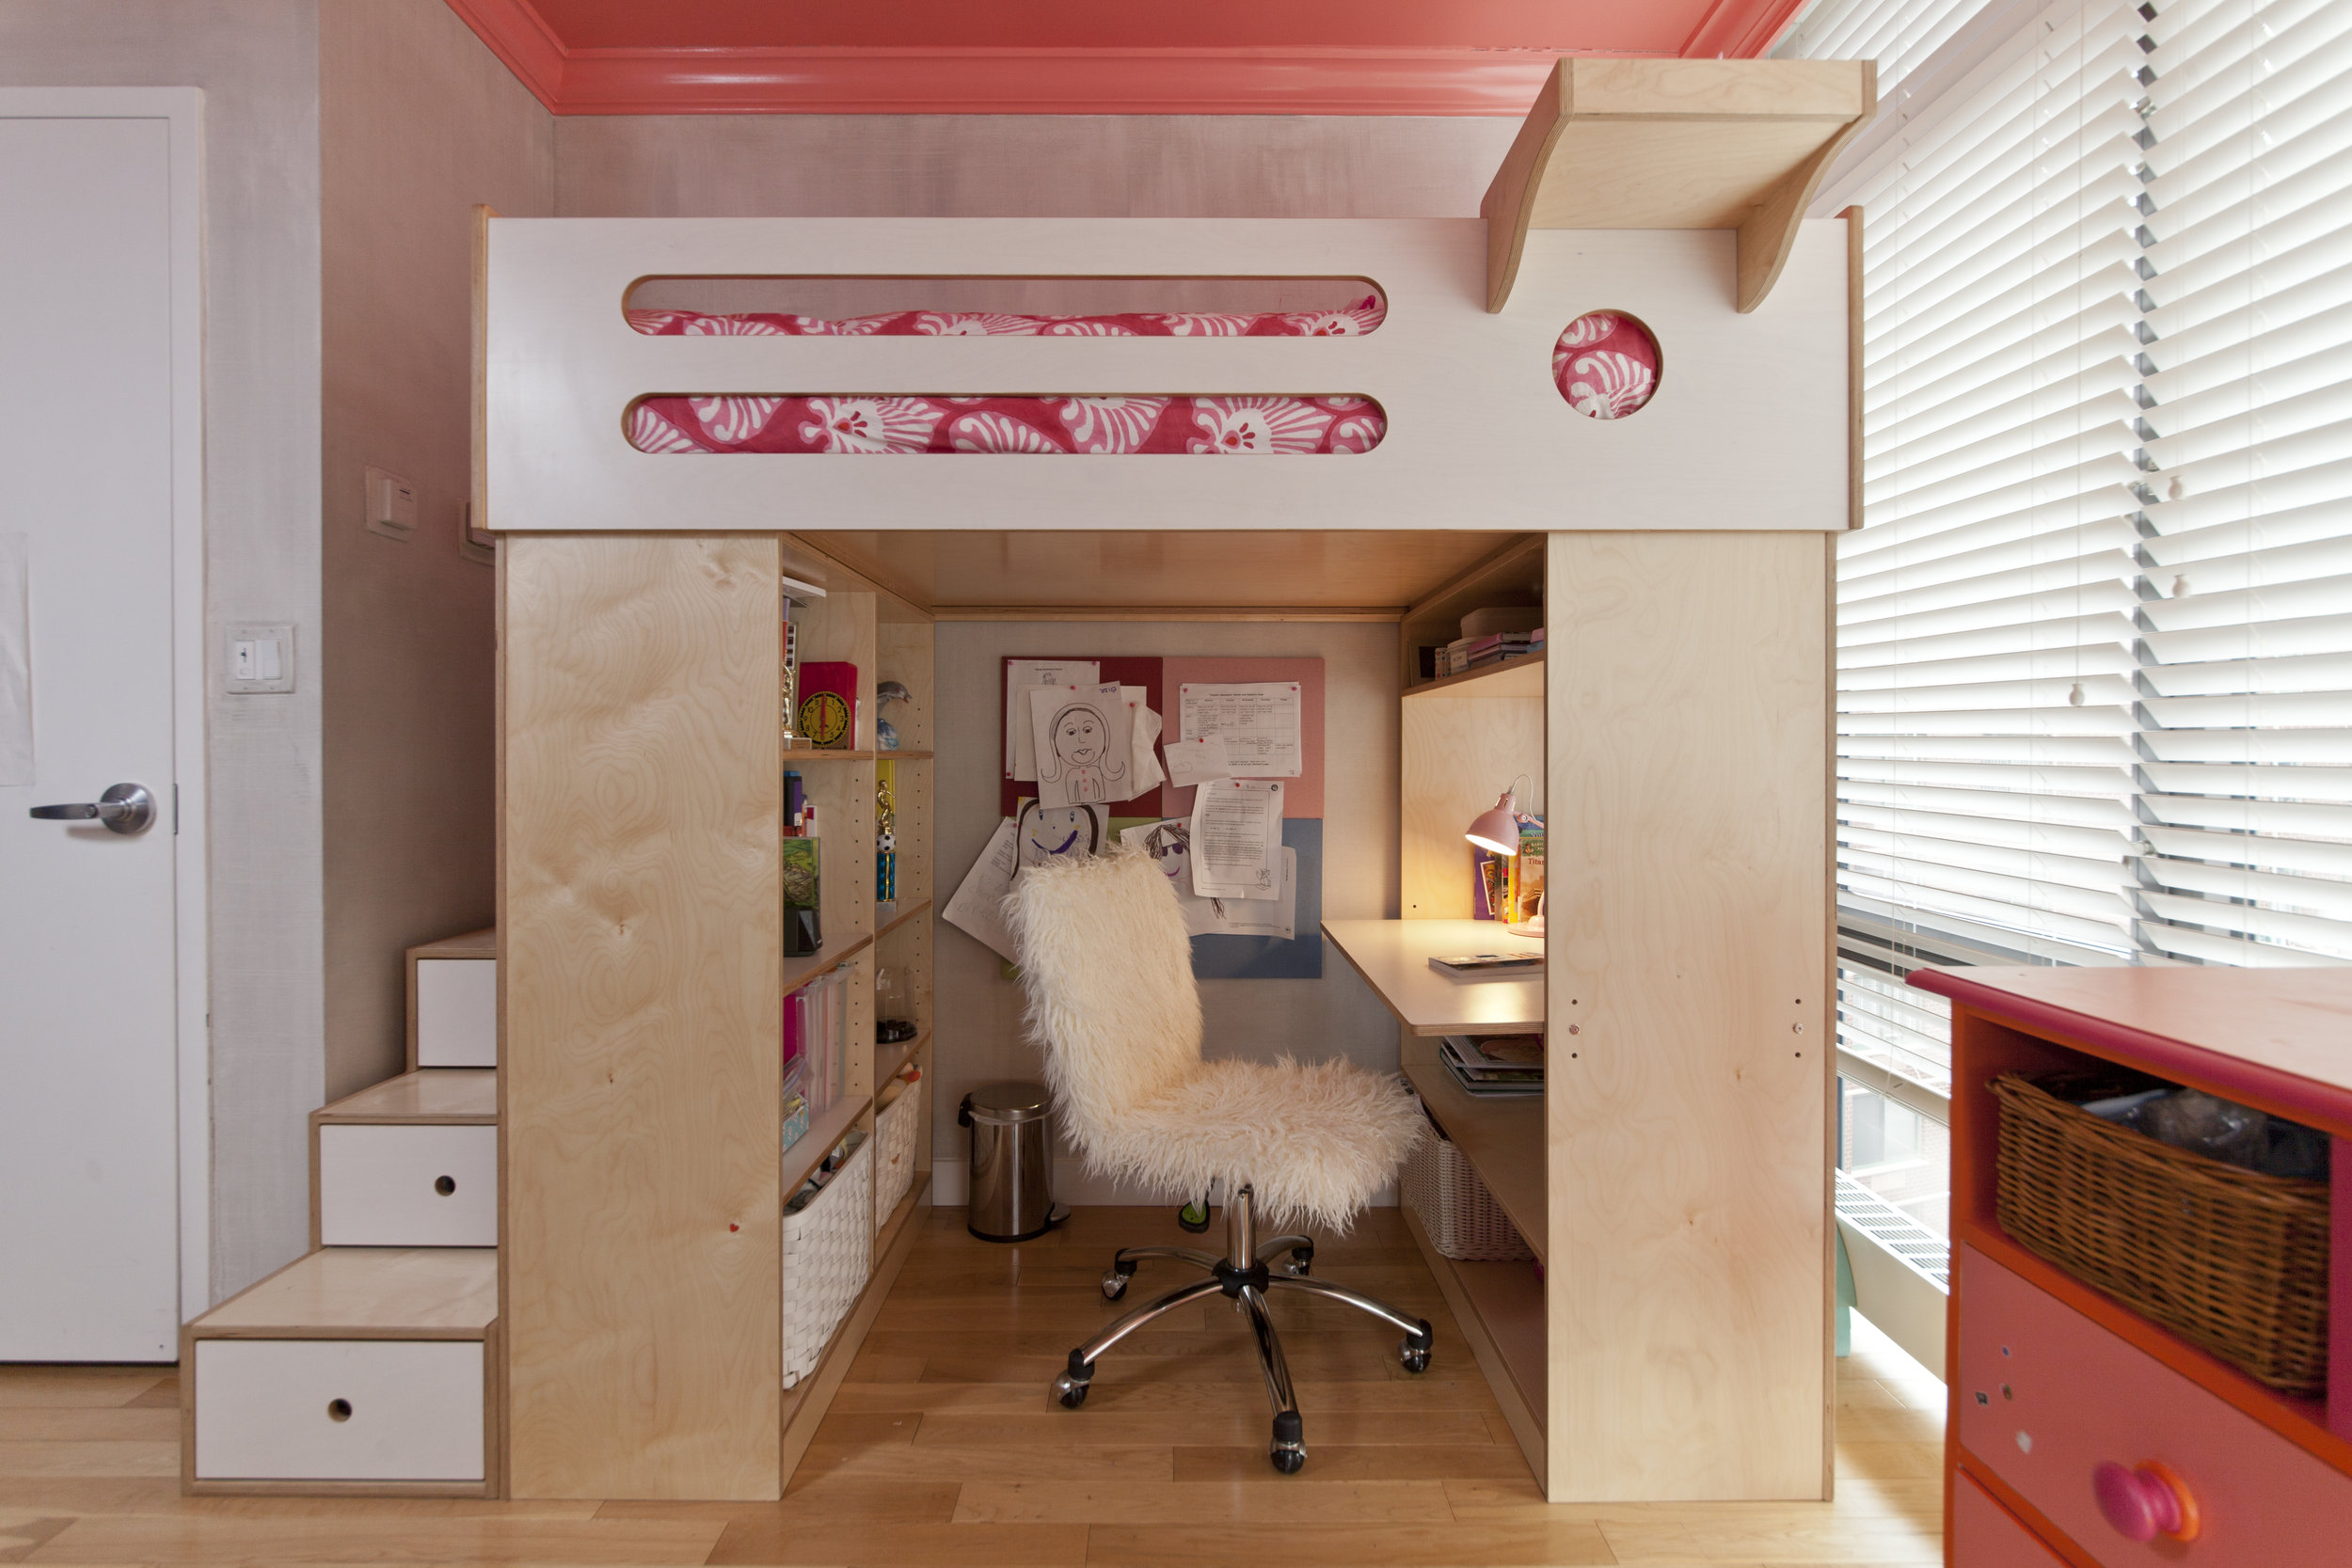 high cabin beds with storage